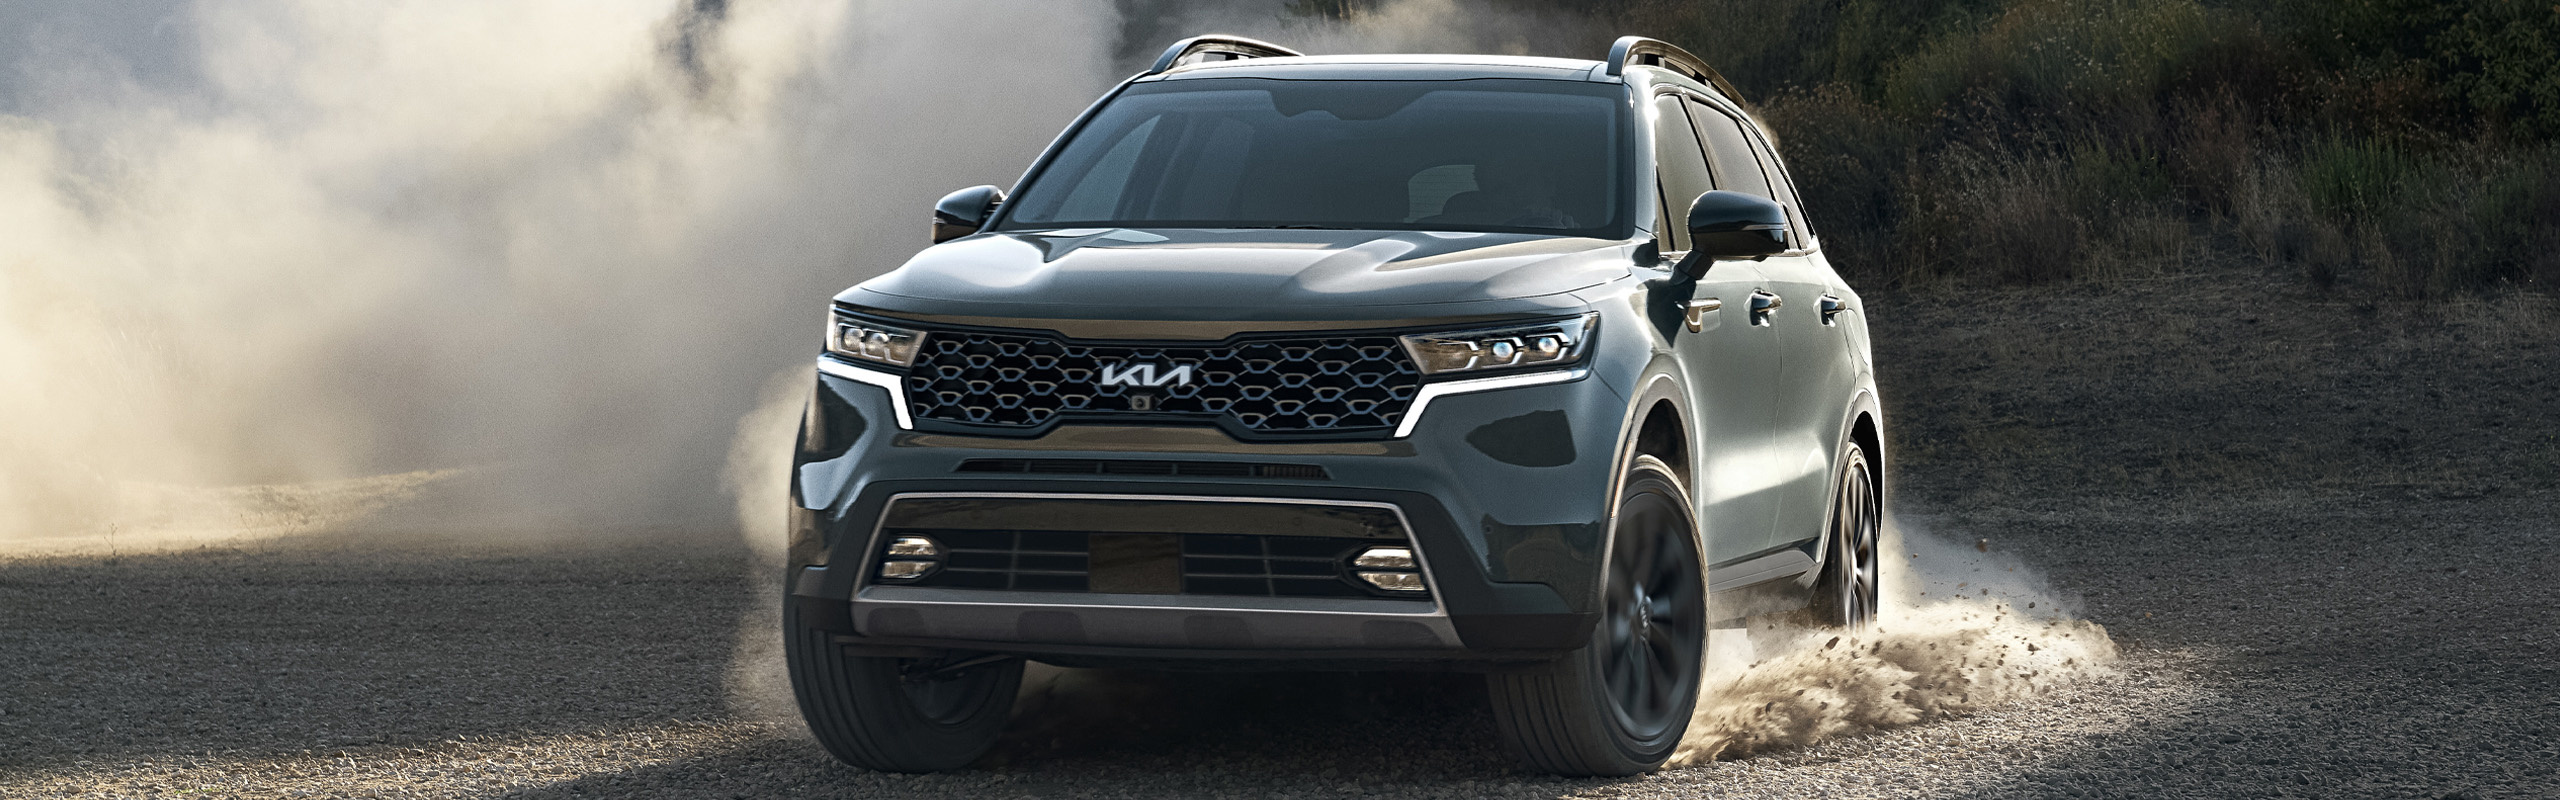 2023 Kia Sorento Driving Off Road In The Mountains With Torque-Vectoring All-Wheel Drive Three-Quarter View